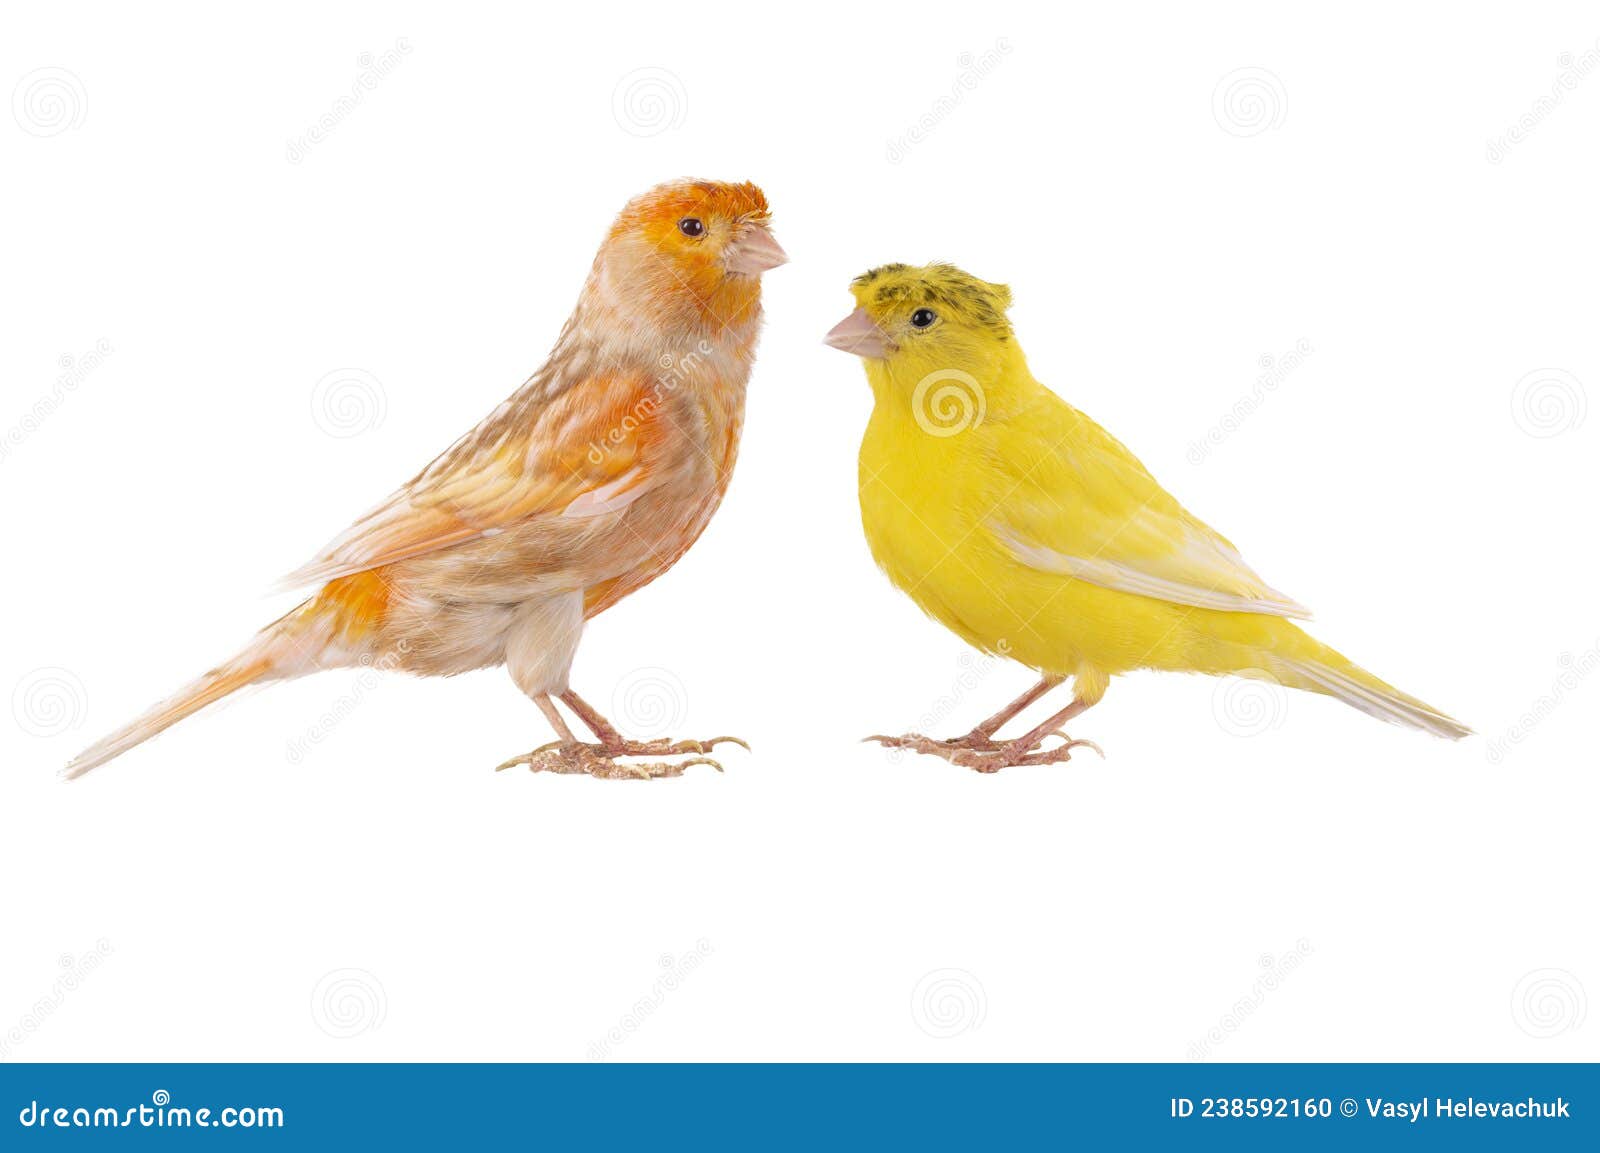 two canaries  on white